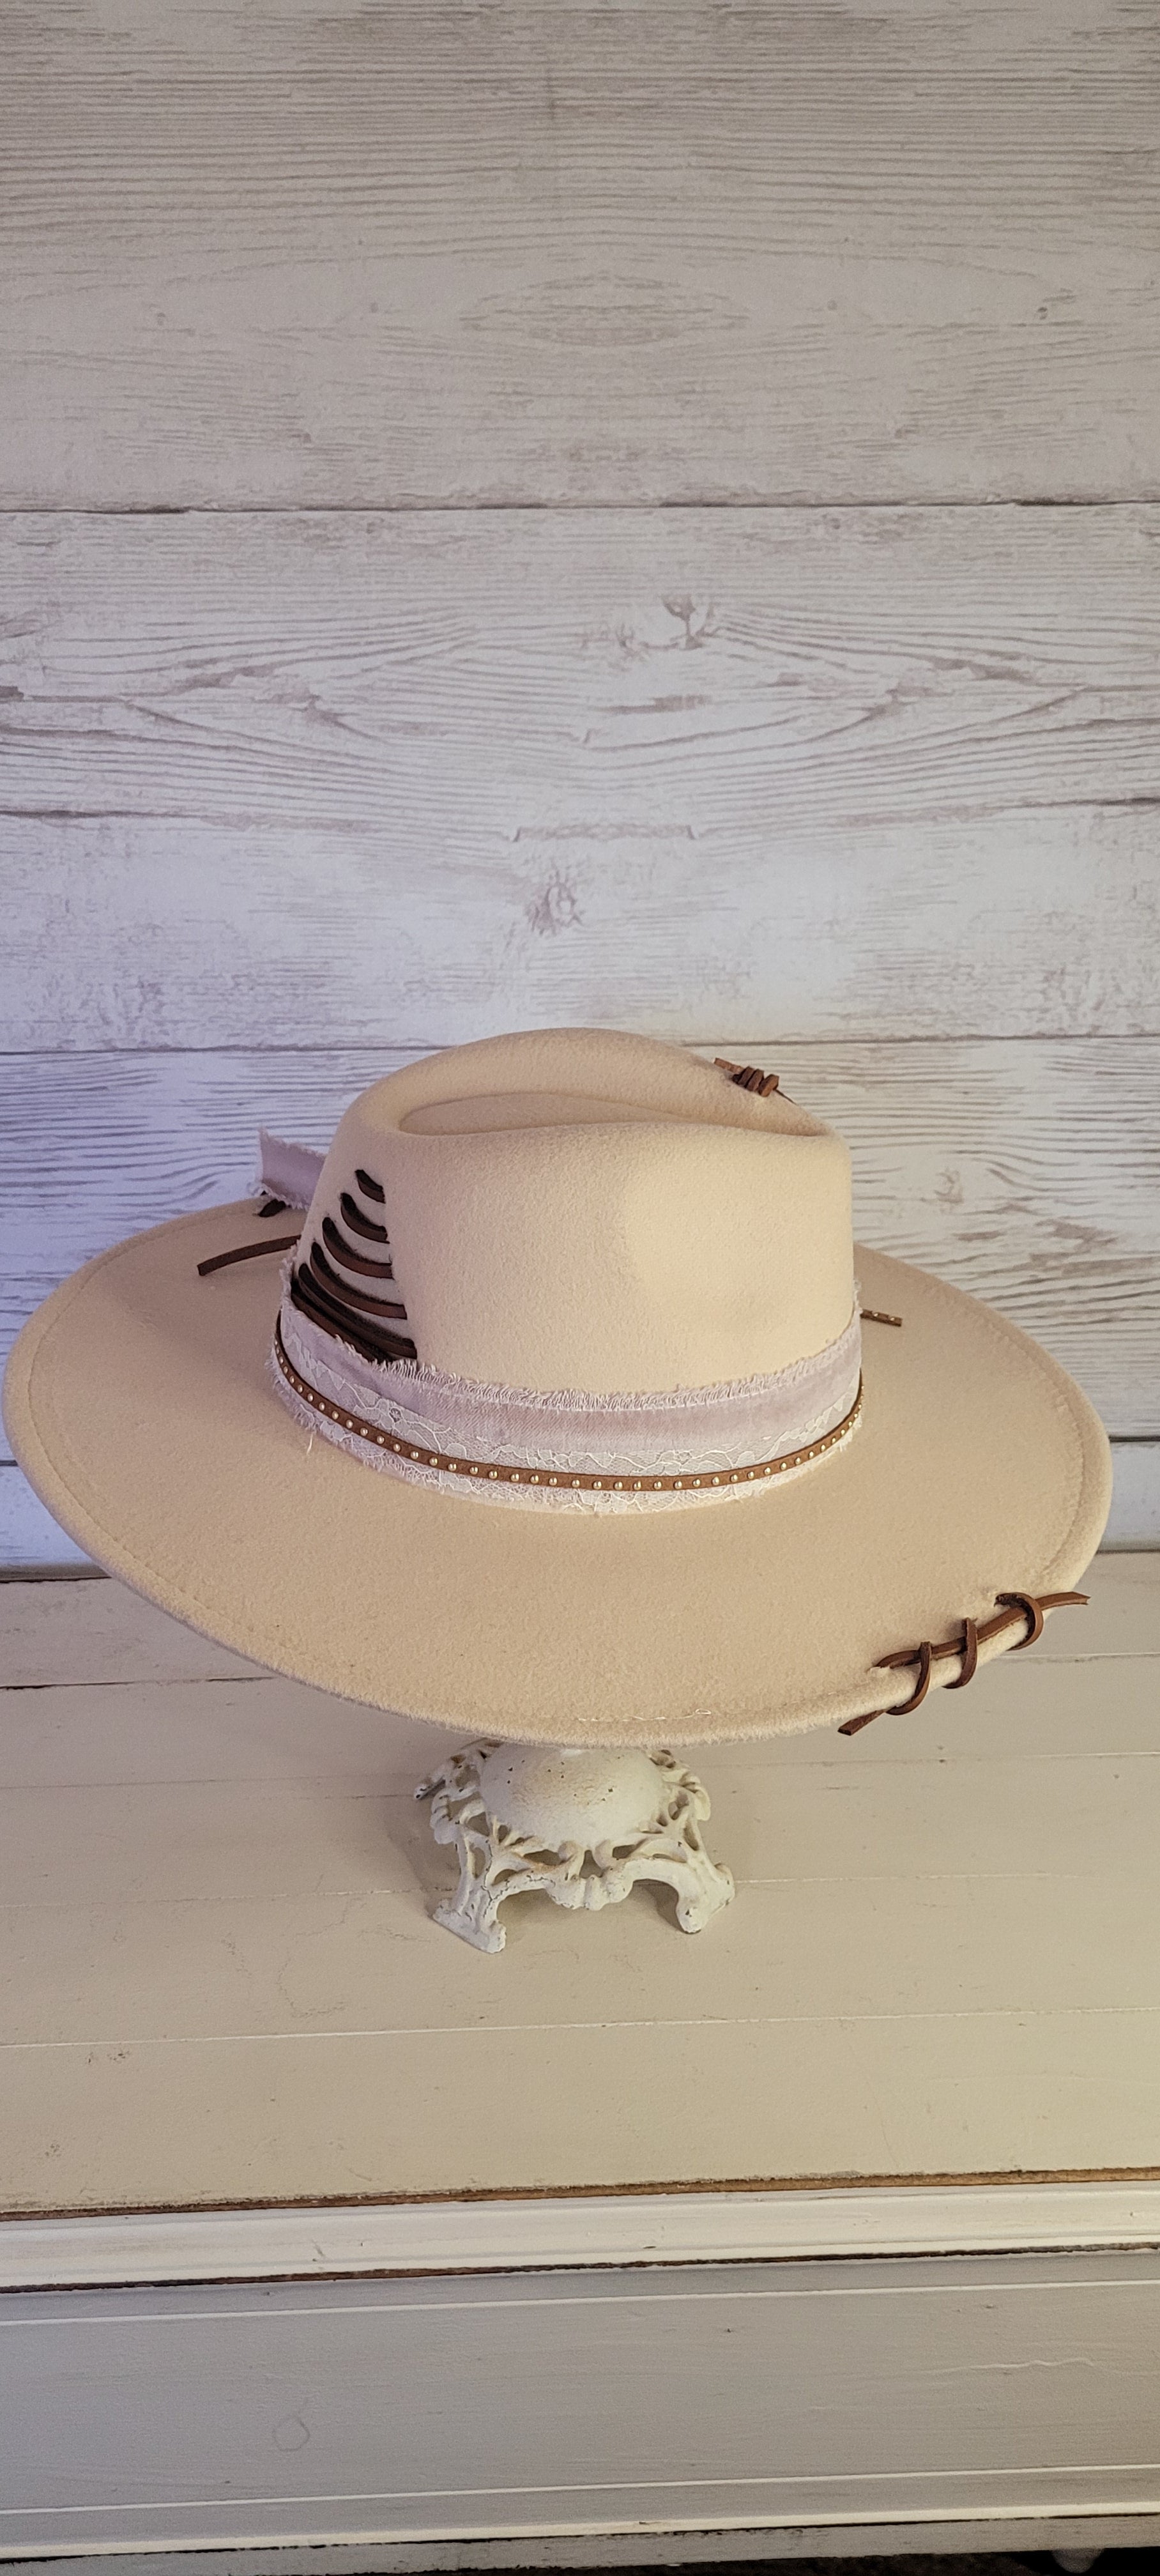 Features velvet mushroom ribbon, lace ribbon, leather band with metal detailing, & leather sewn into brim & crown Felt hat Flat brim 65% polyester and 35% cotton Ribbon drawstring for hat size adjustment Head Circumference: 24" Crown Height: 5" Brim Length: 15.75" Brim Width: 14.5" Branded & numbered inside crown Custom designed by Kayla